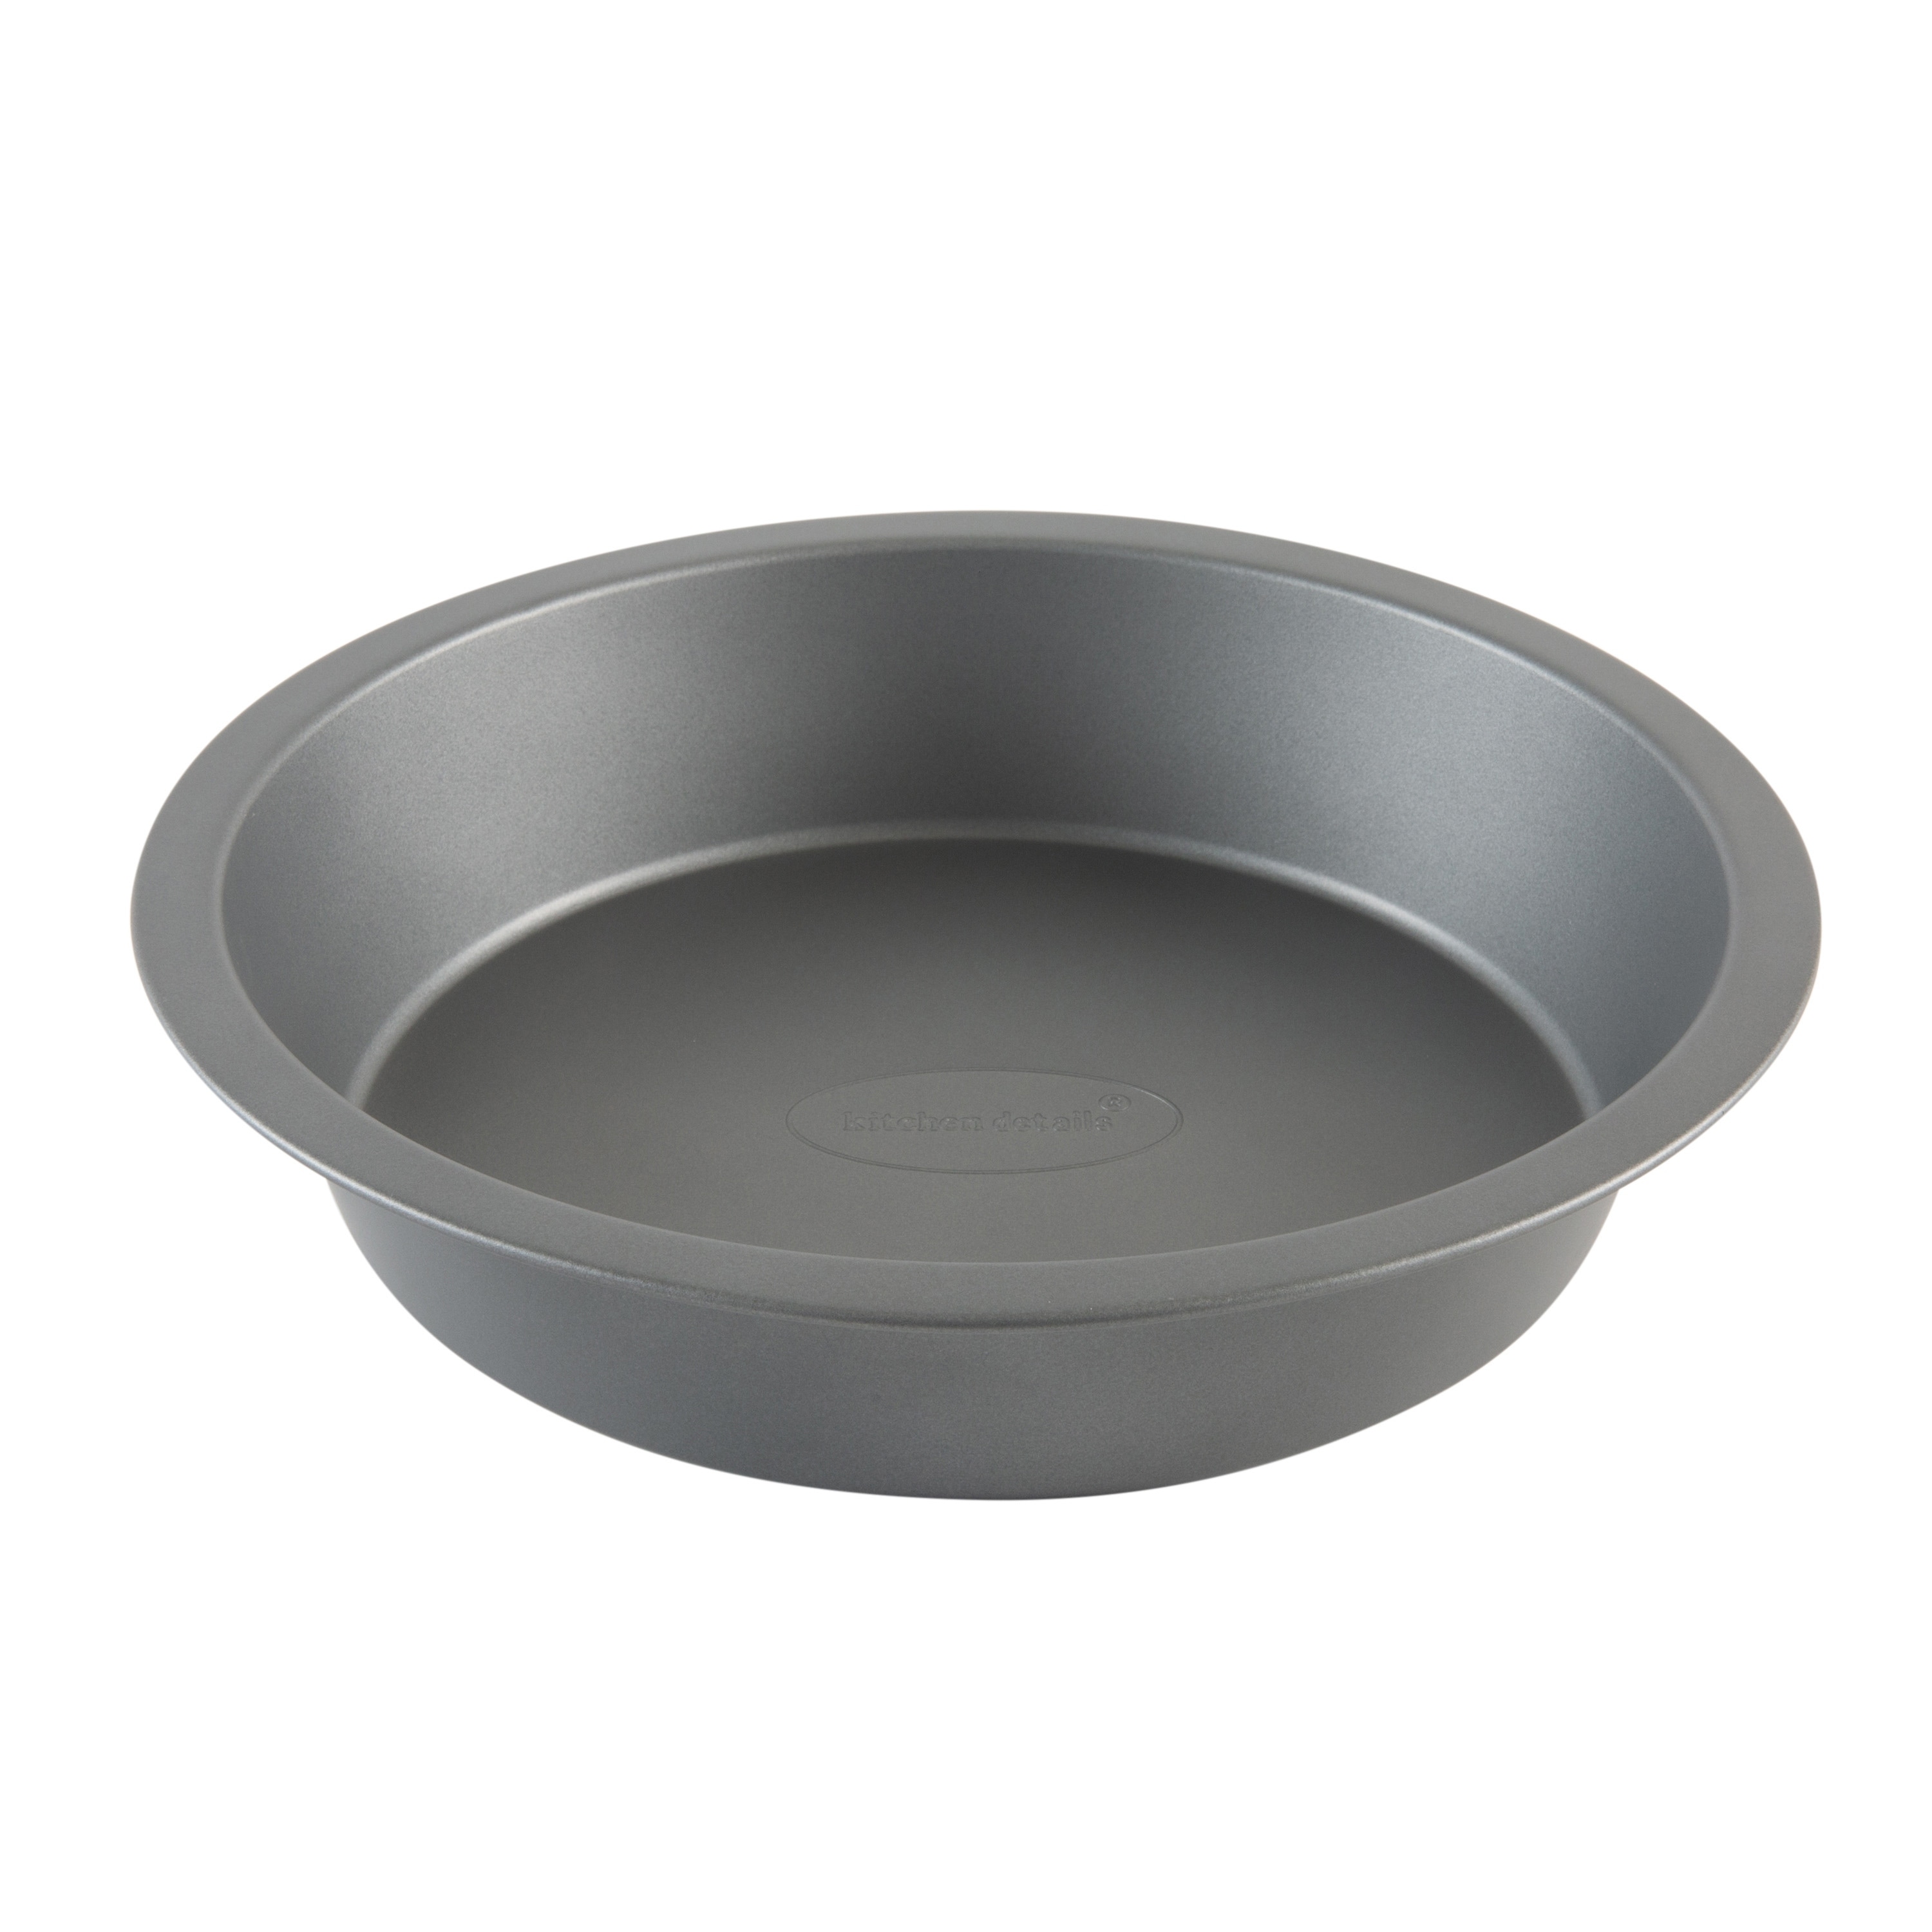 https://ak1.ostkcdn.com/images/products/is/images/direct/7b6427cc69682af4e57e23b7ee88ab60a80025f5/Kitchen-Details-9.5-Inch-Round-Cake-Pan.jpg